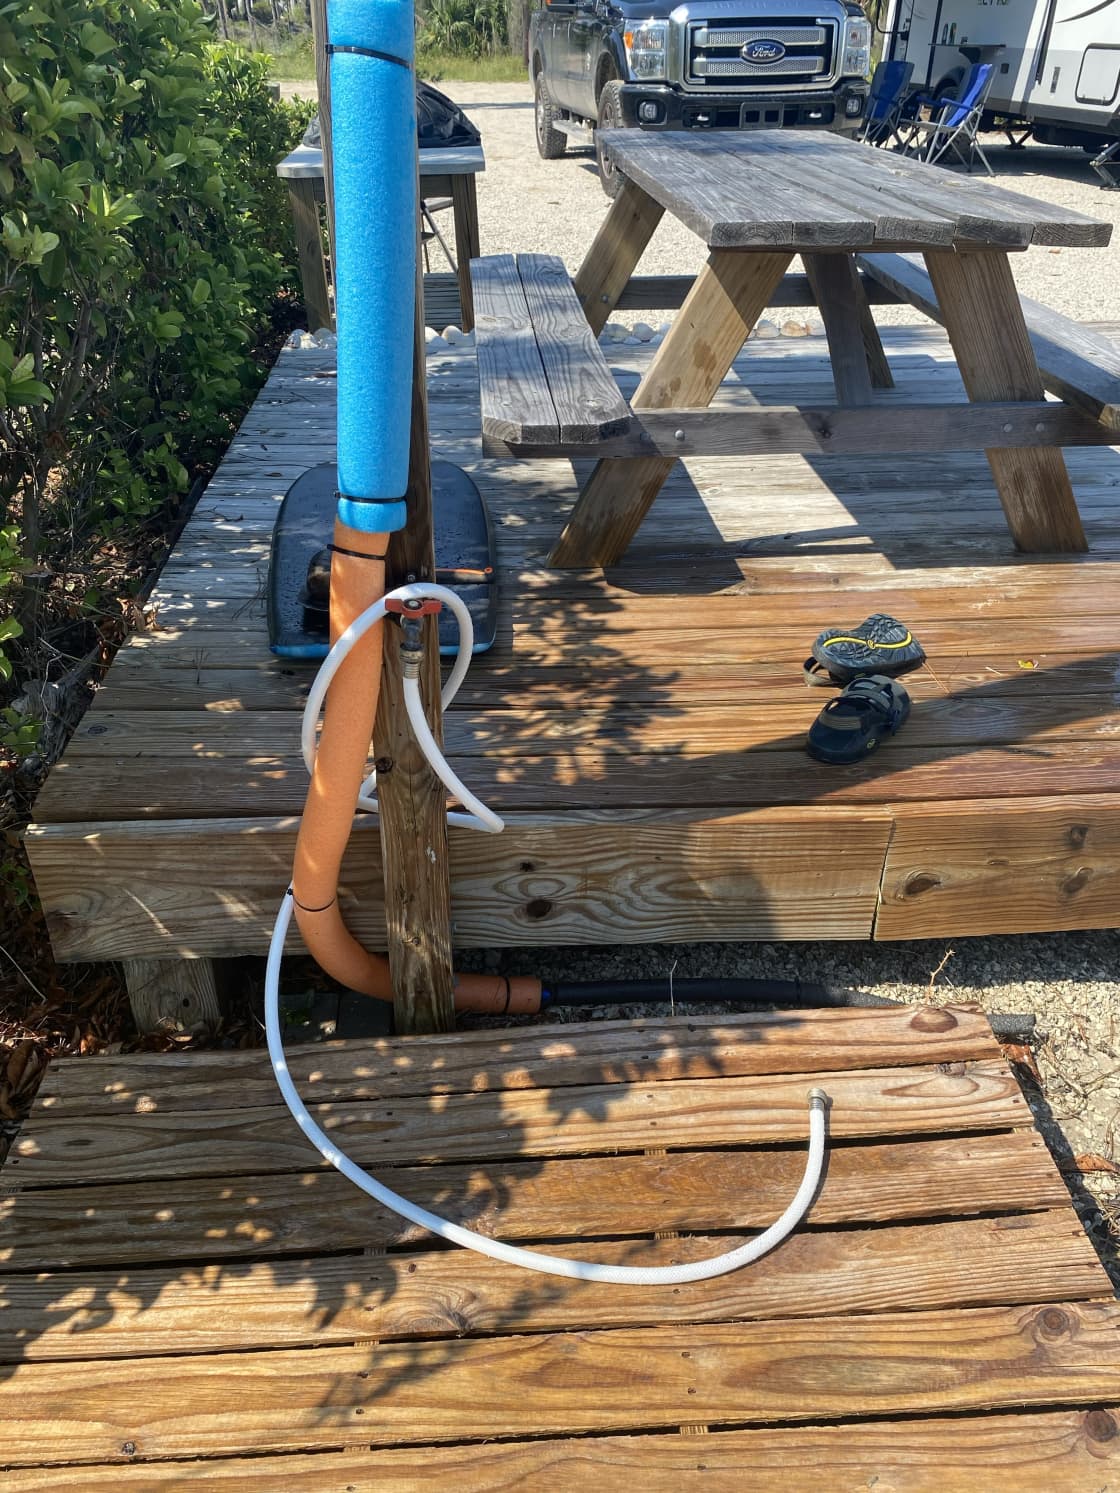 Outdoor shower plus hose for washing off sand and beach gear.